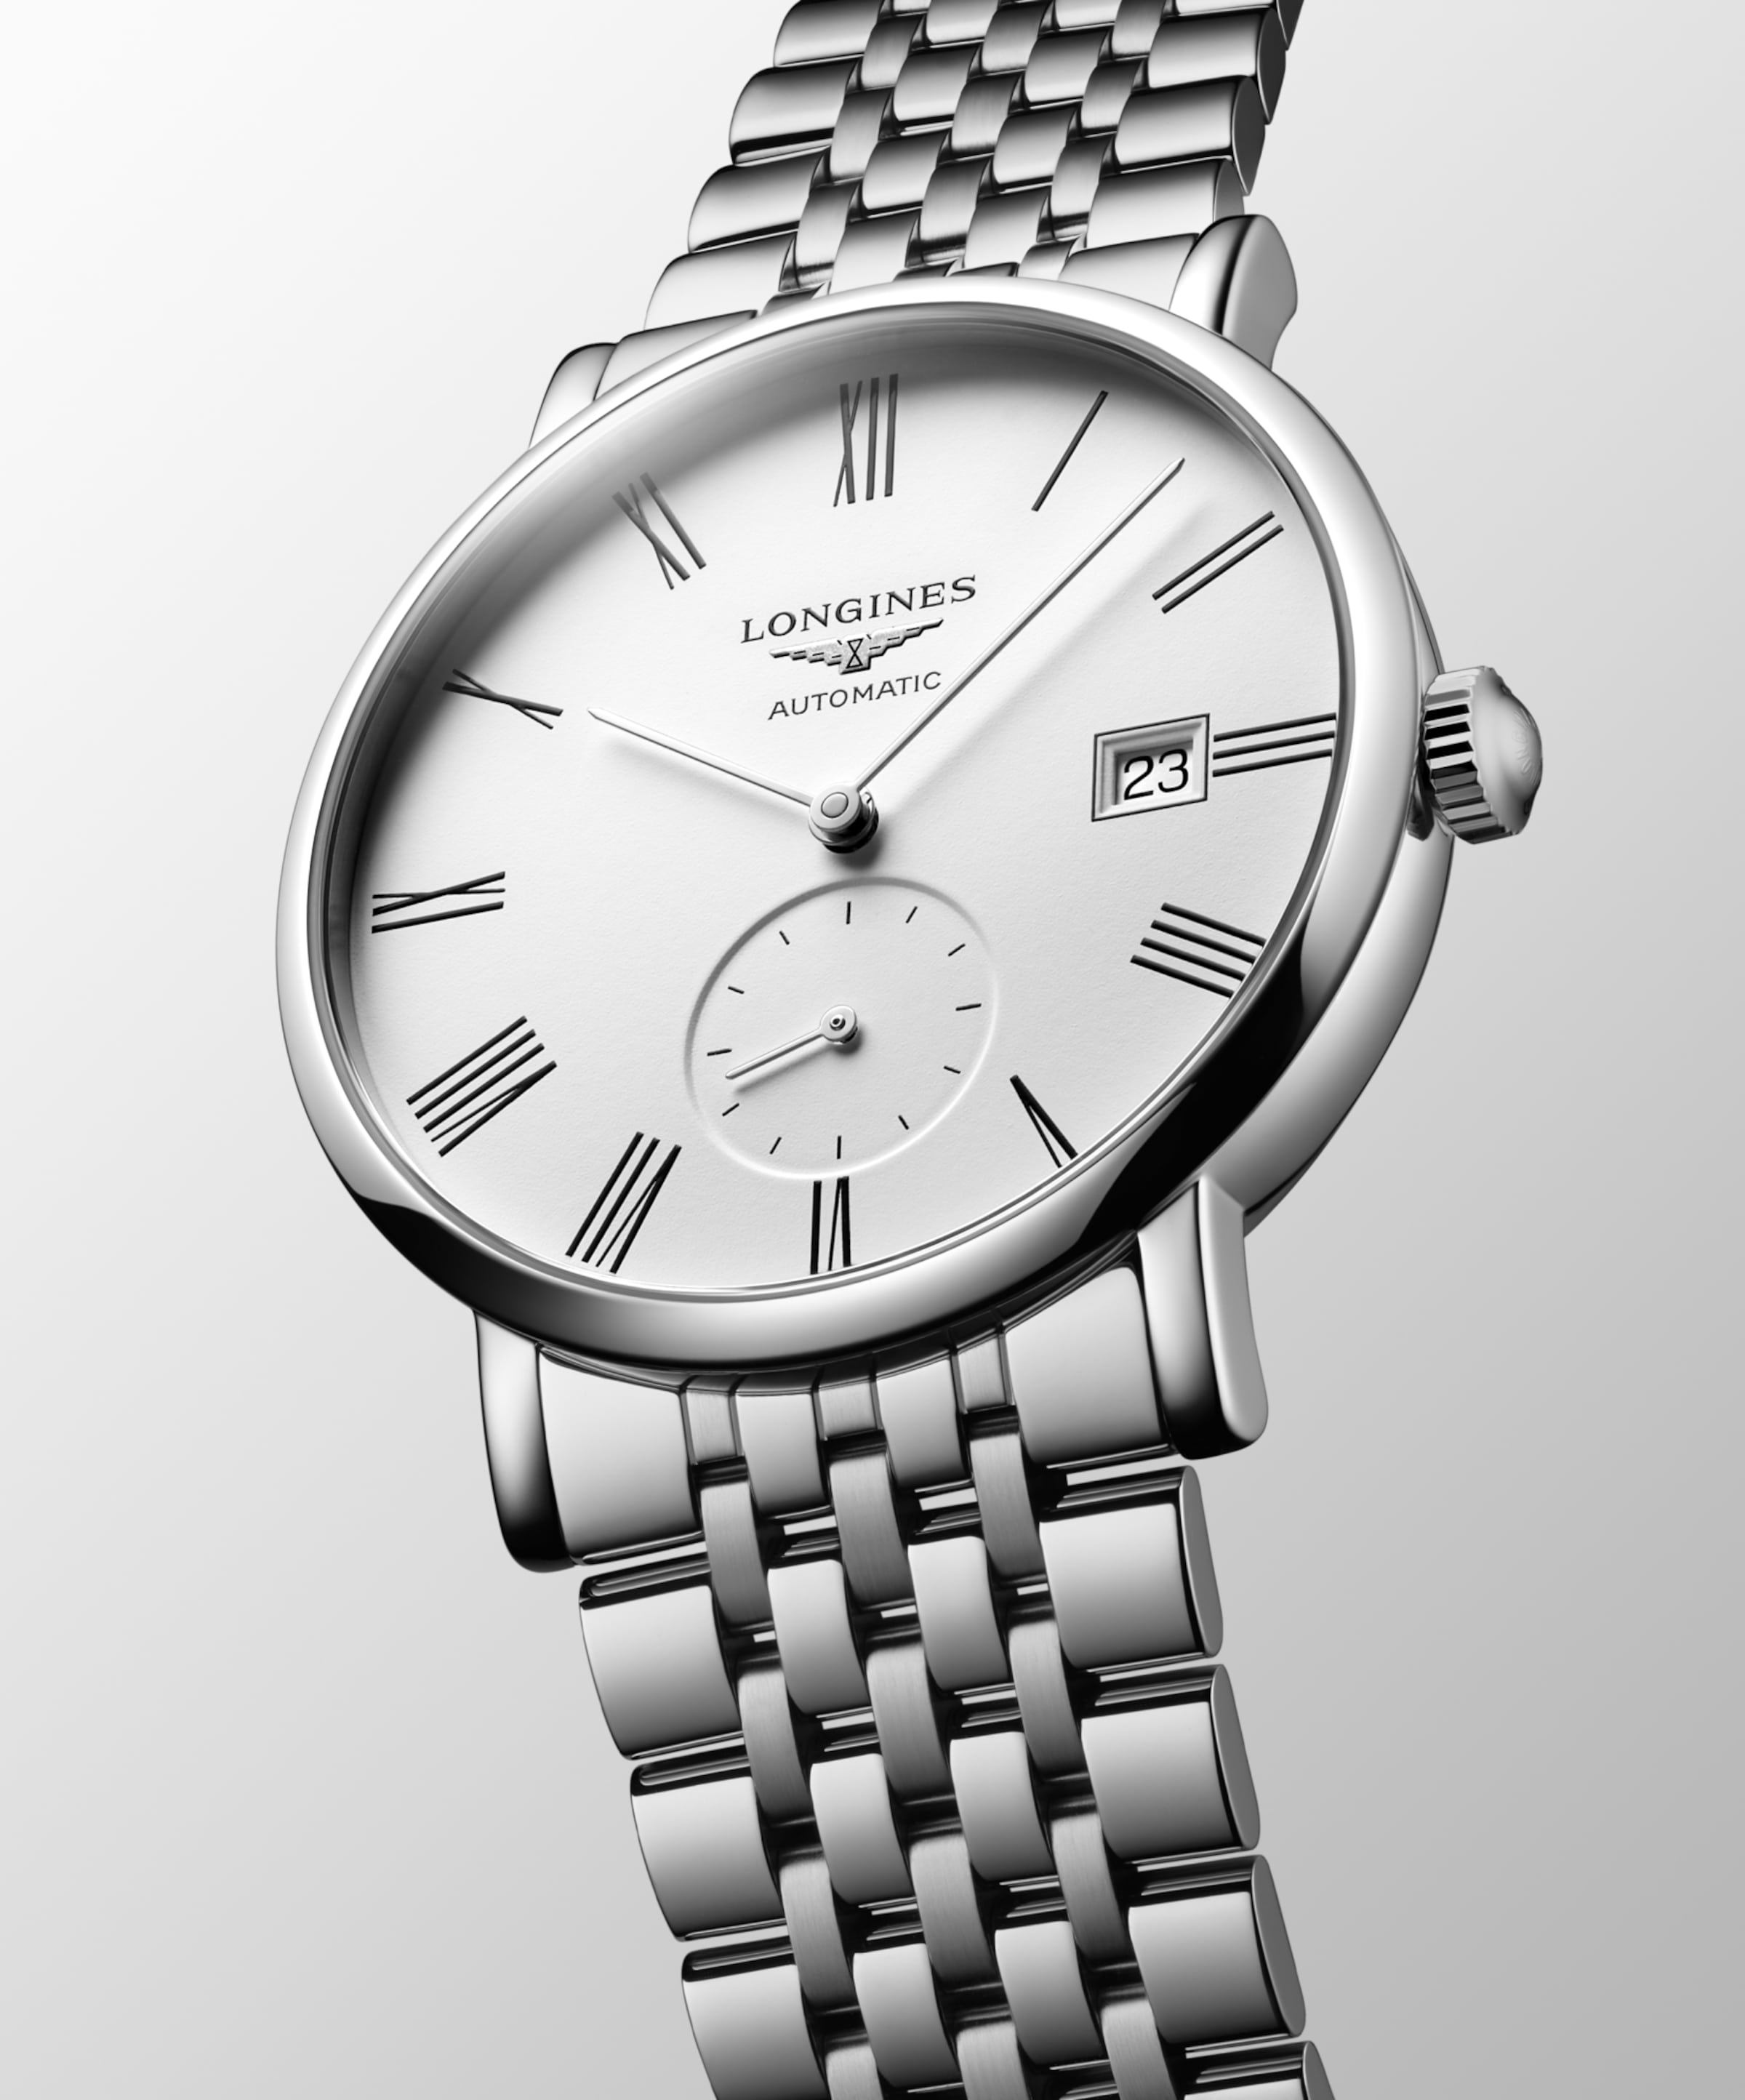 Longines ELEGANT COLLECTION Automatic Stainless steel Watch - L4.812.4.11.6